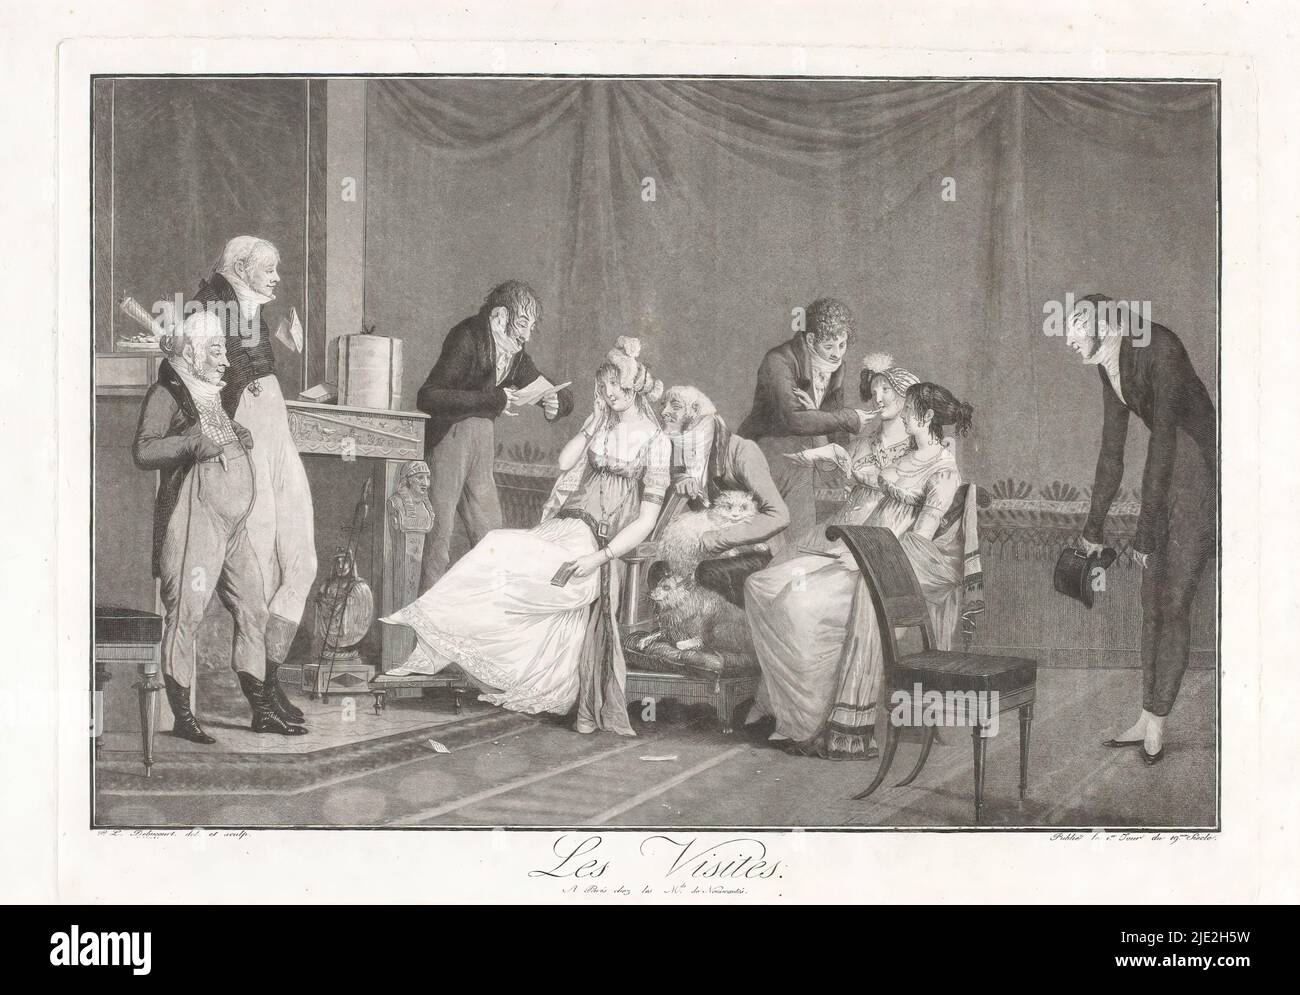 Company of young women and men in an interior, Les Visites (title on object), print maker: Philibert-Louis Debucourt, (mentioned on object), after own design by: Philibert-Louis Debucourt, (mentioned on object), publisher: Les Marchands de Nouveautés, (mentioned on object), print maker: France, after own design by: France, publisher: Paris, 1-Jan-1800, paper, etching, height 299 mm × width 414 mm, height 447 mm × width 585 mm Stock Photo